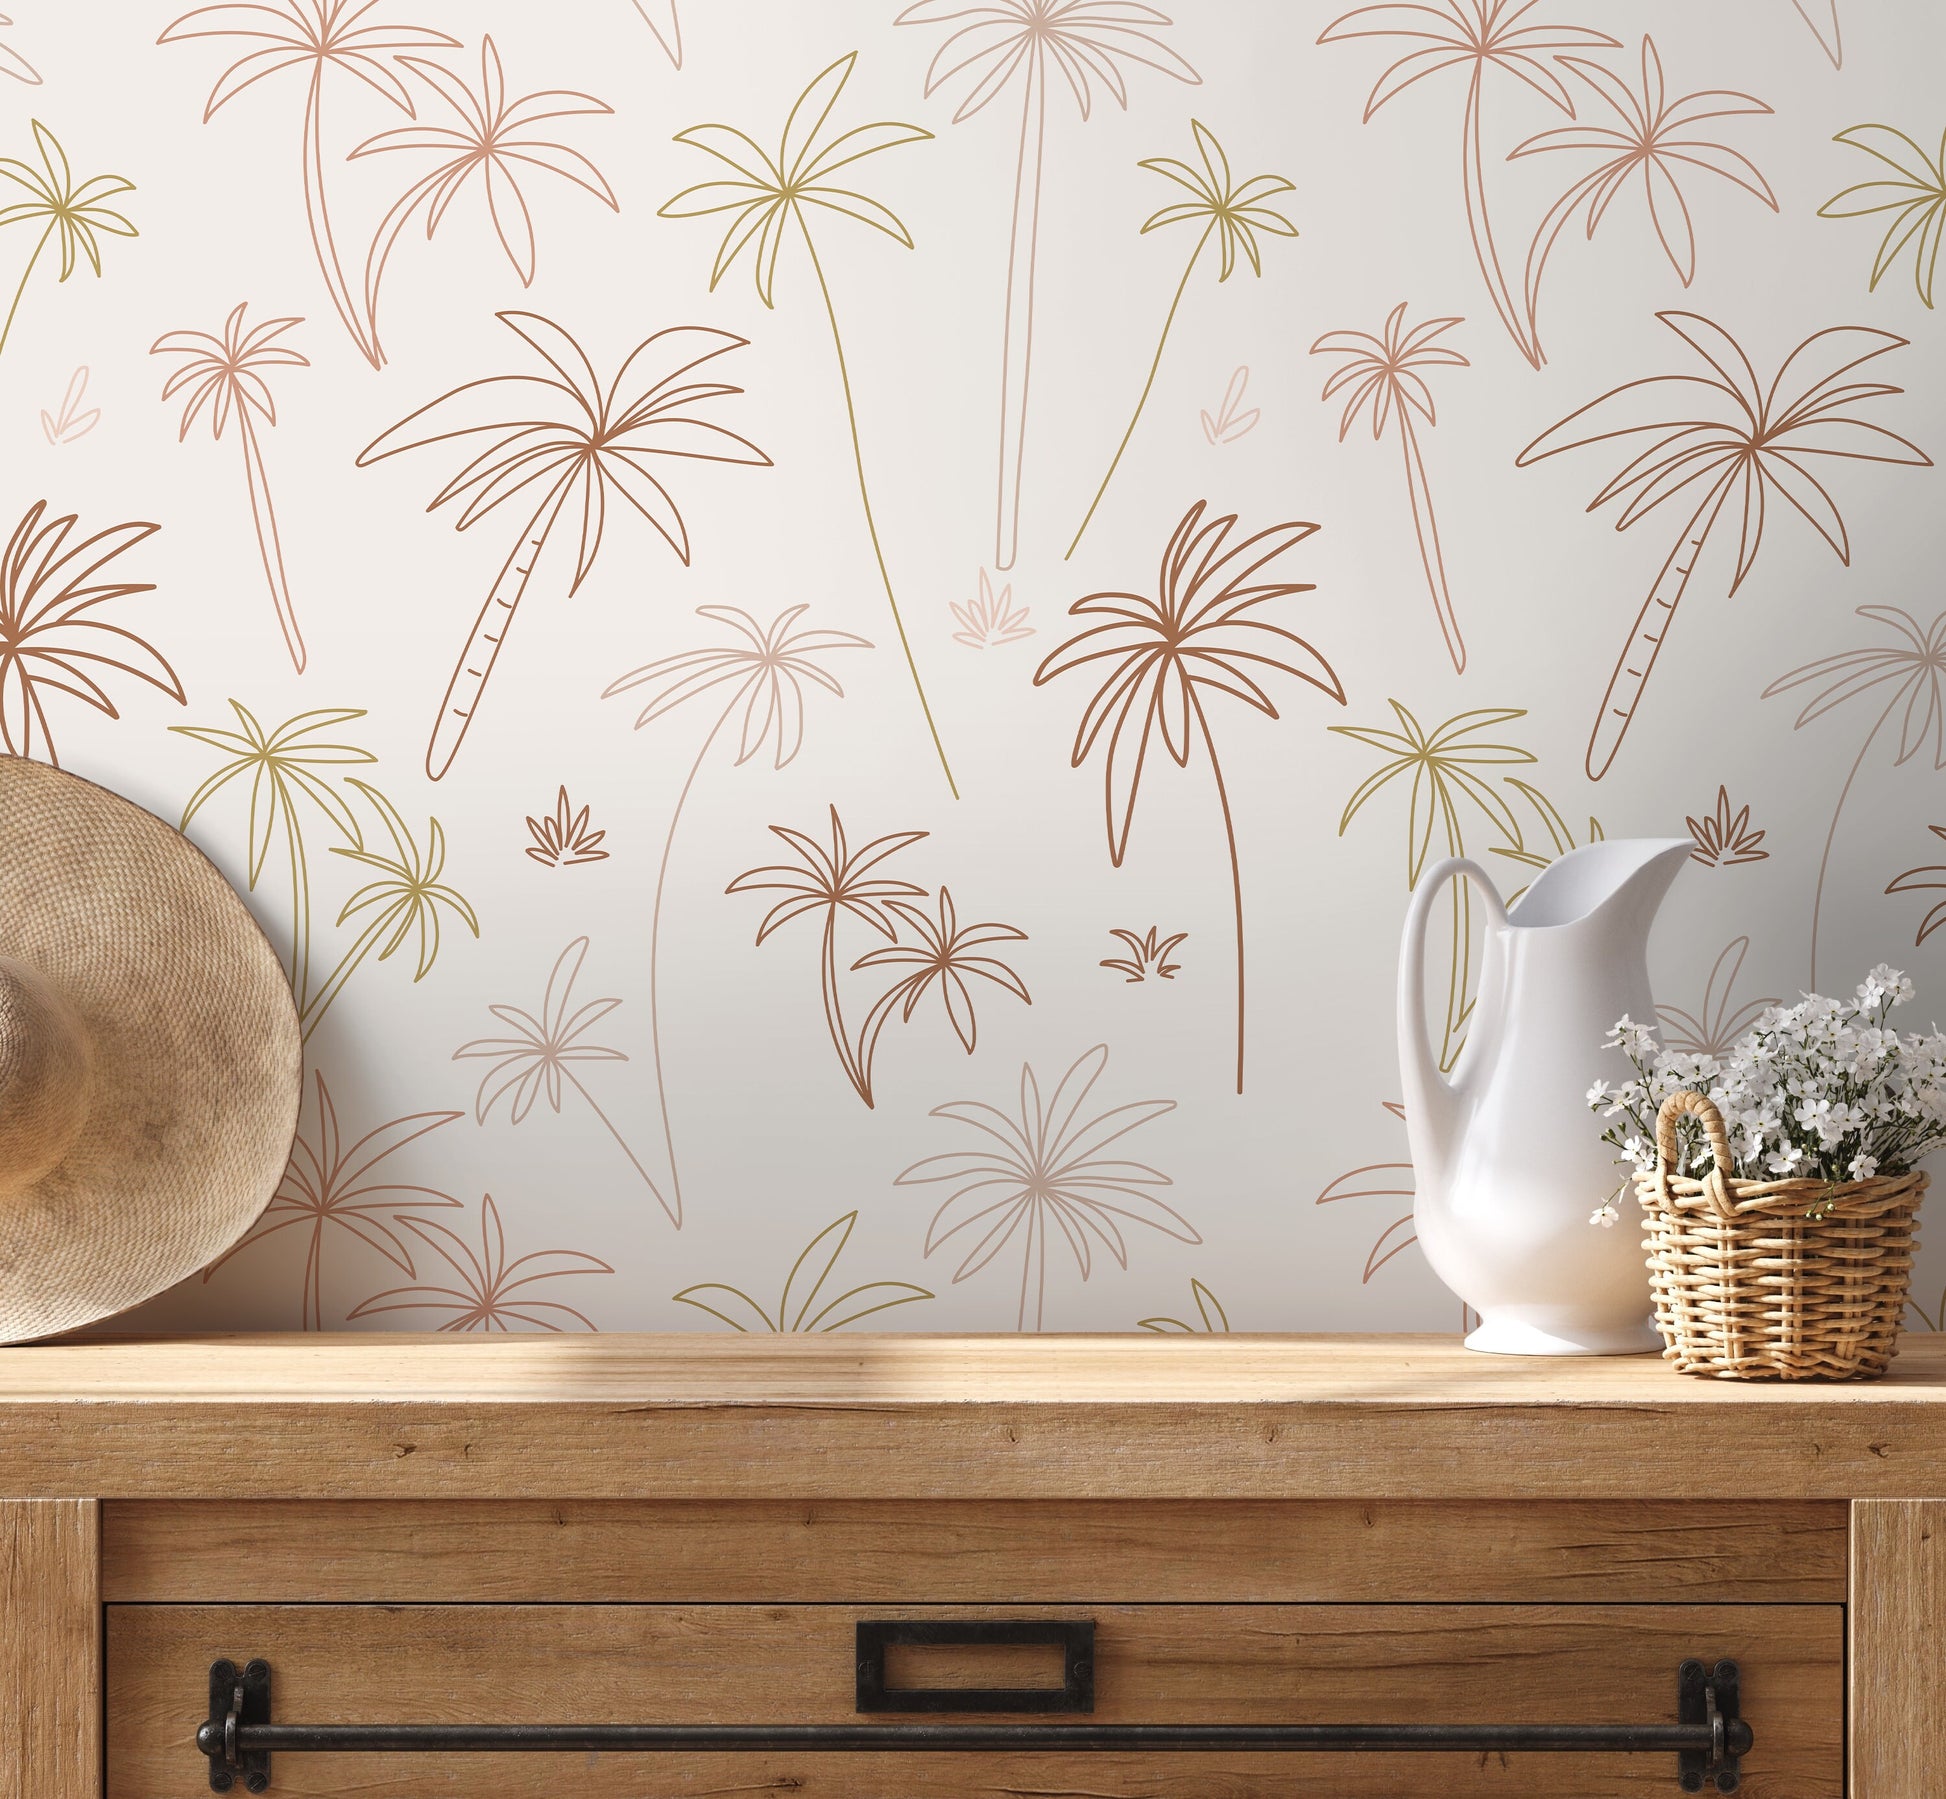 Mayami Wallpaper Tropical Boho Palms in Neutral Tones Wallpaper Nature Wallpaper Peel and Stick Removable Repositionable - ZACF